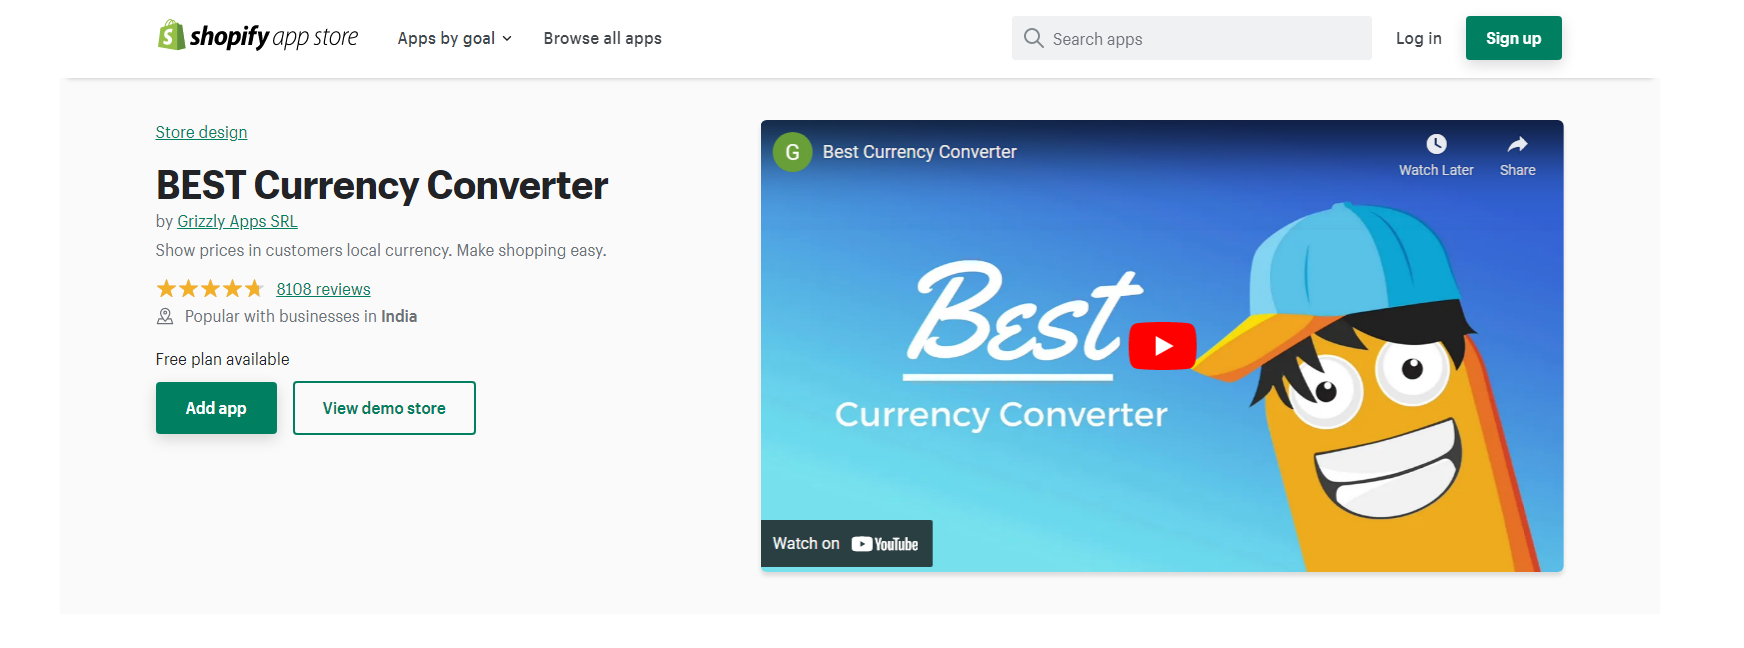 Shopify currency converter